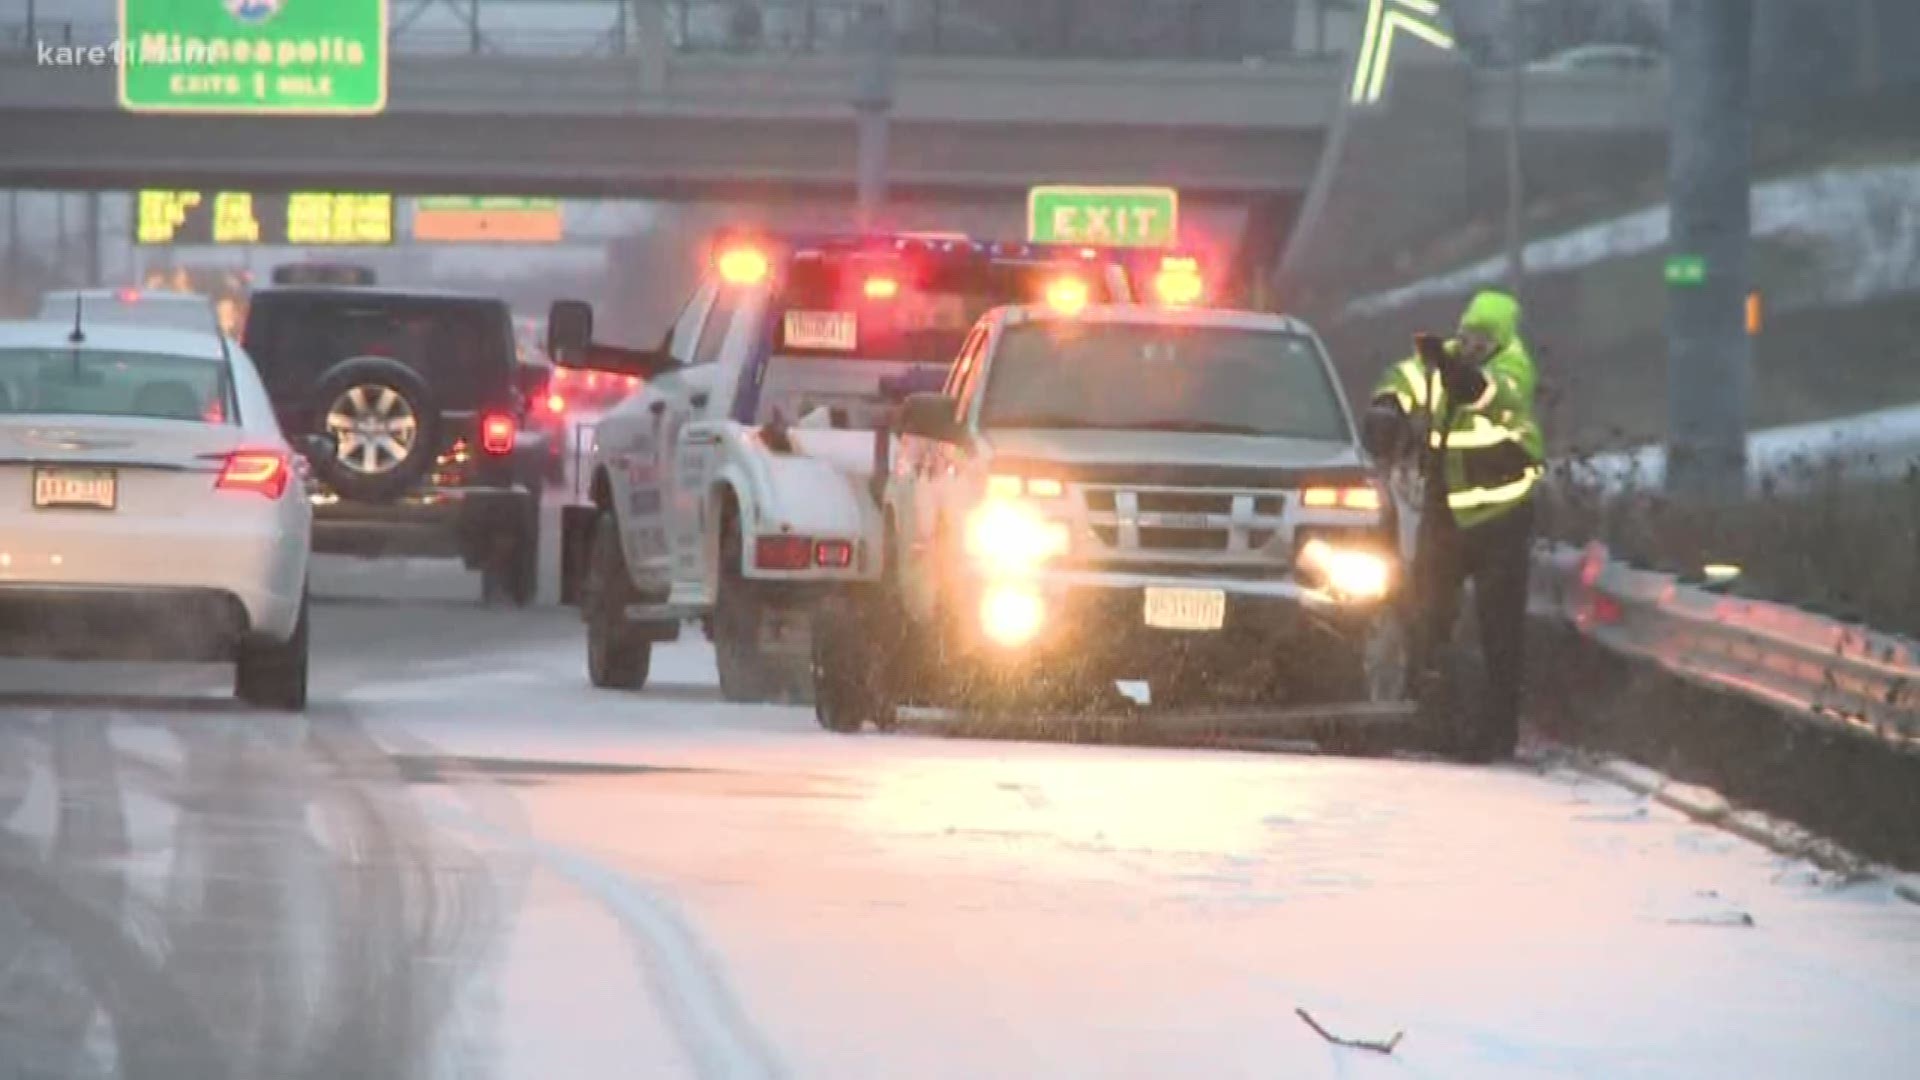 The Minnesota State Patrol reports that between noon and 9:45 p.m., there were 379 crashes across the state, 95 spin-outs, and seven jackknifed semis. MnDOT said conditions were just right for snow to melt and re-freeze on the roads. https://kare11.tv/2Qm